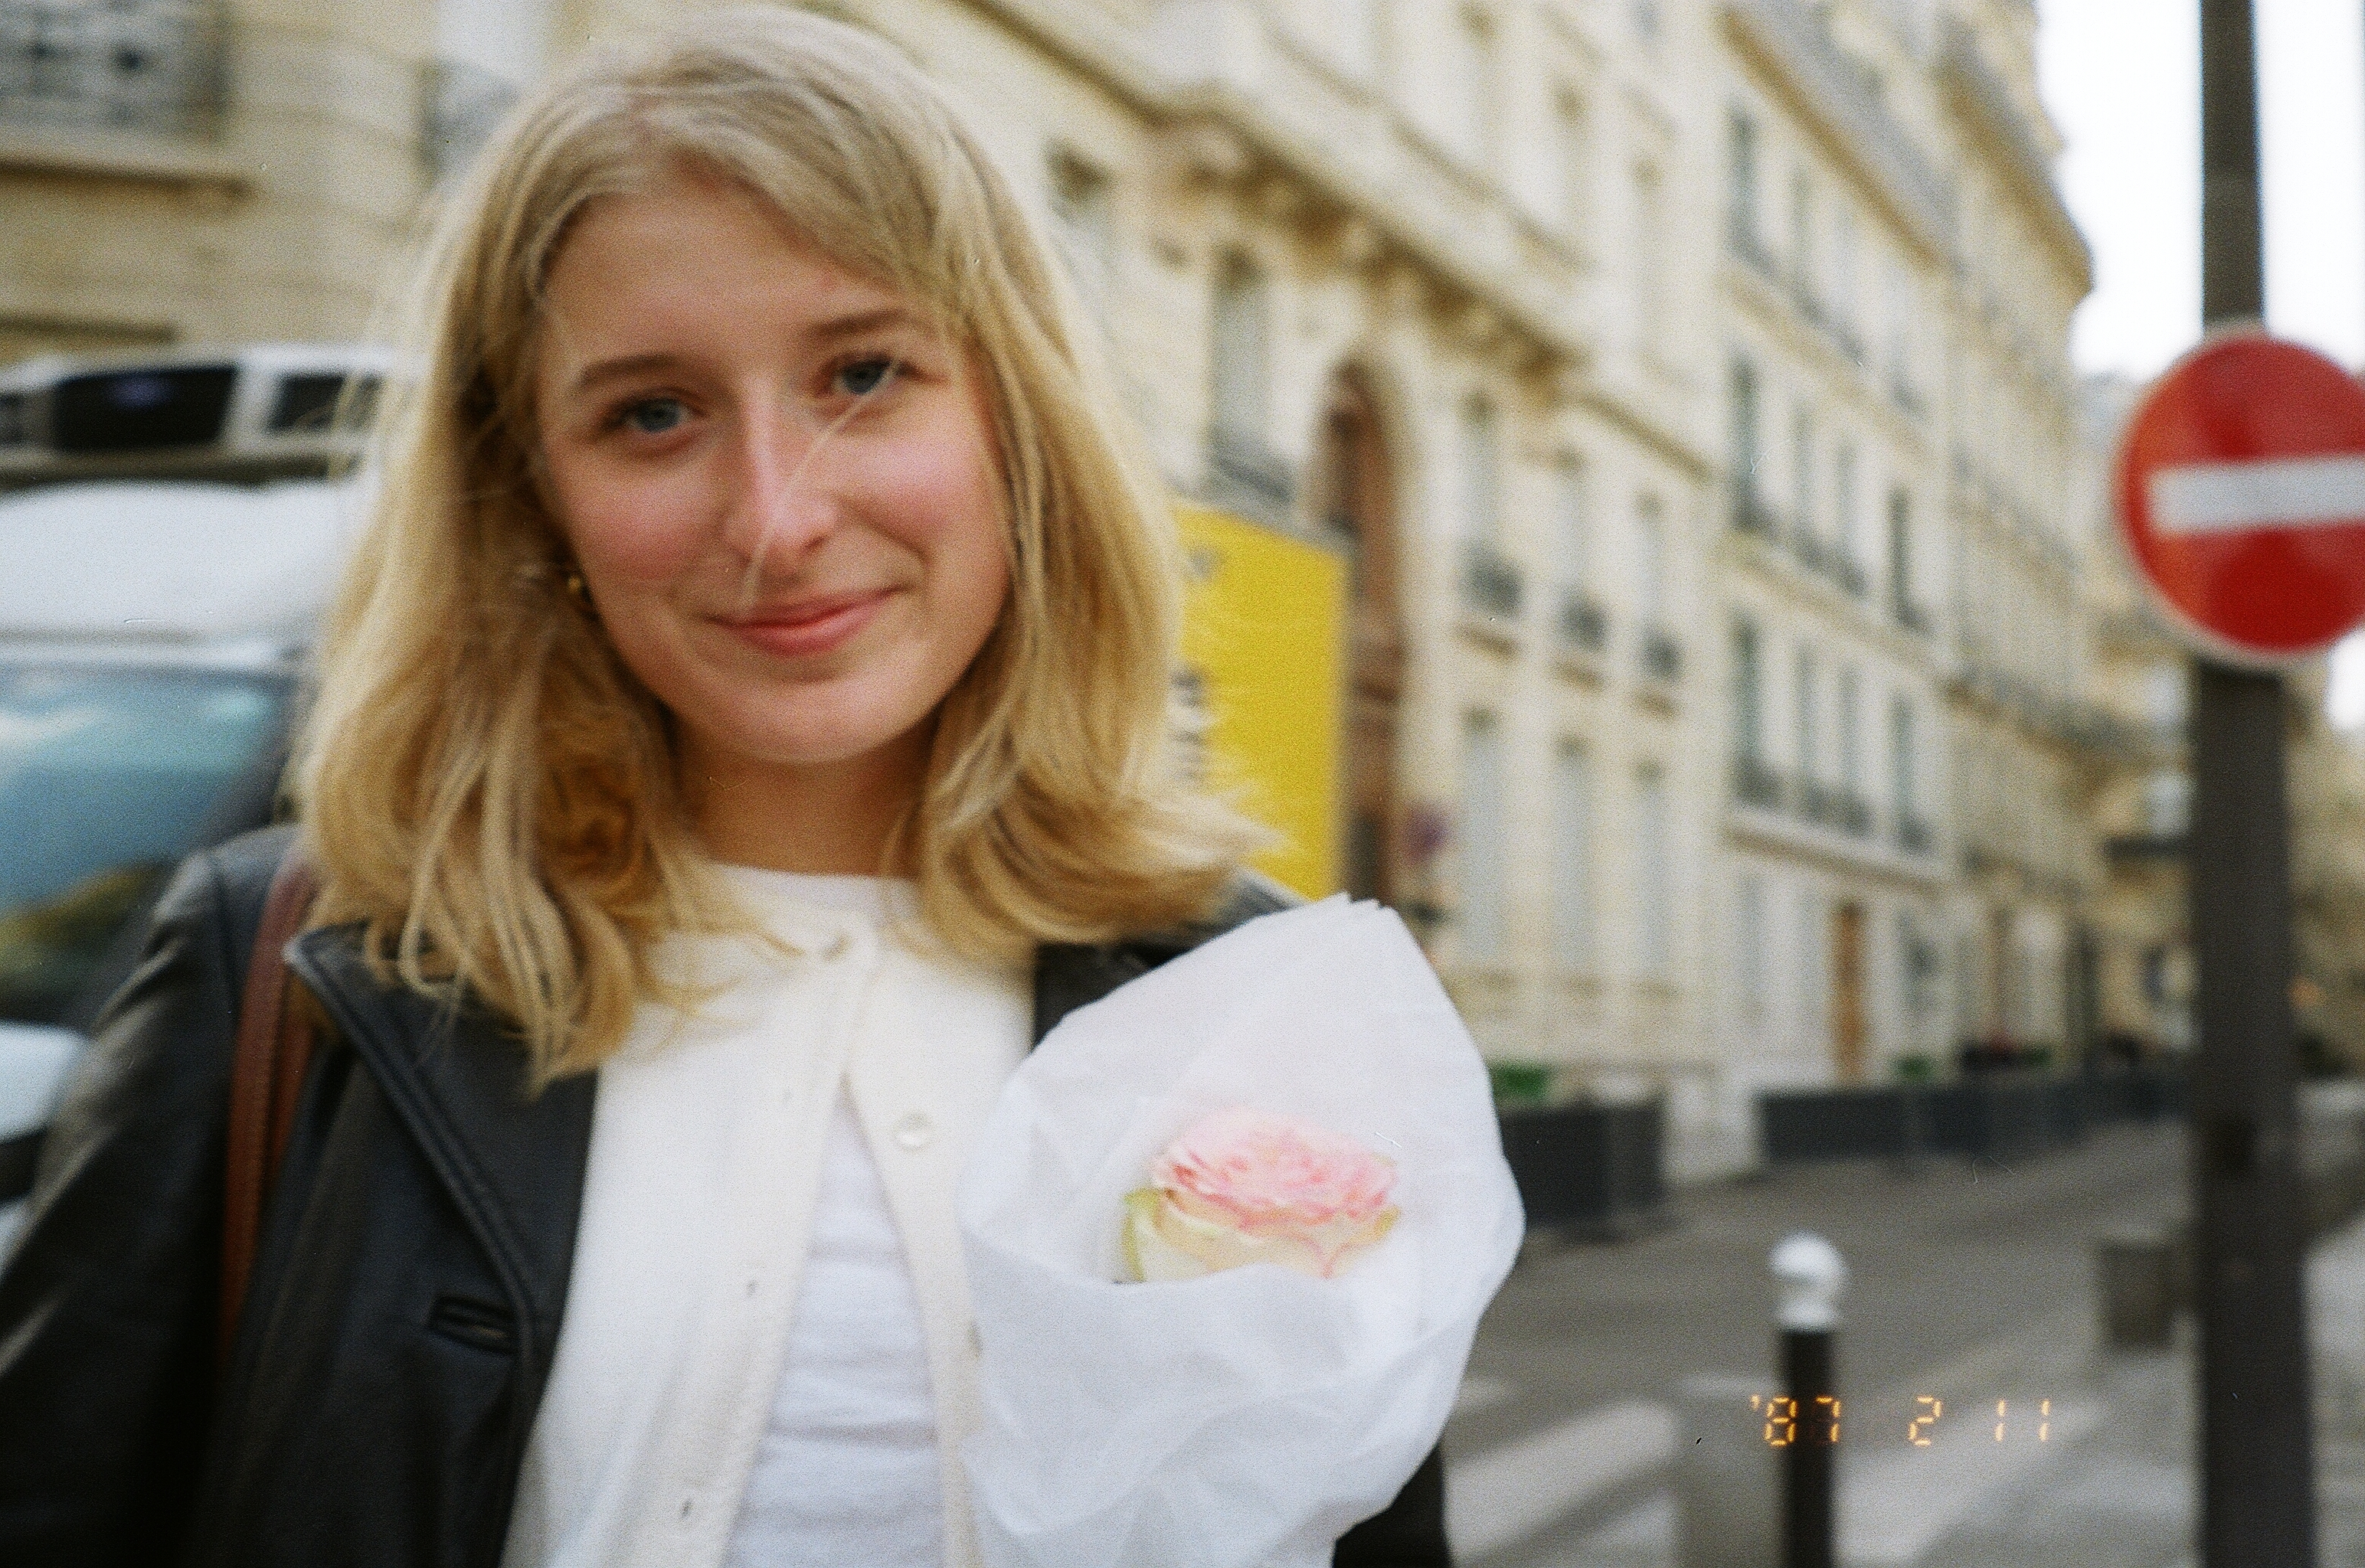 This photo depicts a 20 year old girl with blonde hair softly smiling on street while holding a light pink rose. She is standing on a street in paris, and you can see beautiful buildings behind her and a car going past. She is wearing a cream colored cardigan with a black leather jacket over top.